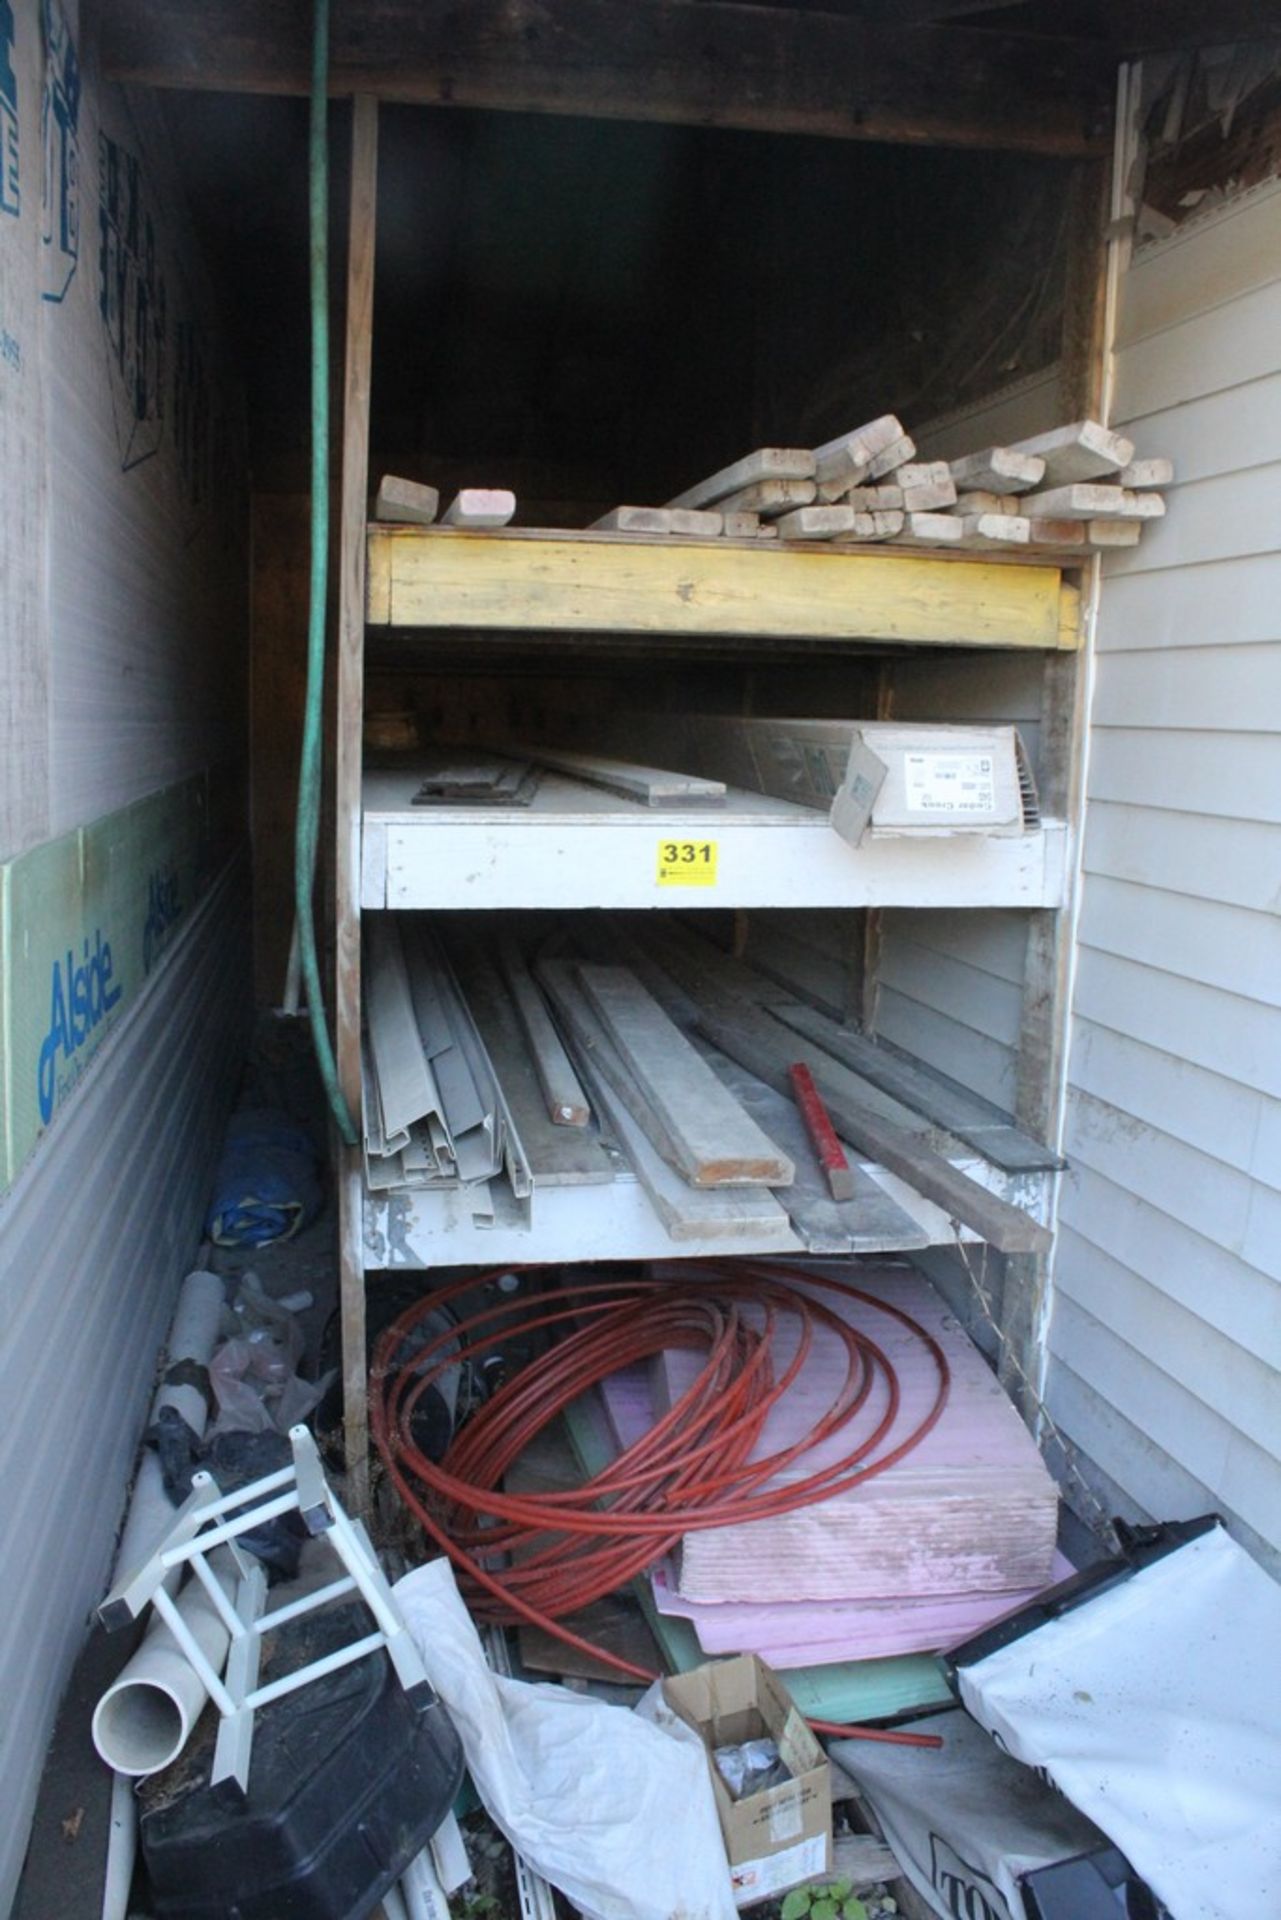 ASSORTED LUMBER, INSULATION, AND MISC. ON SHELVING UNIT